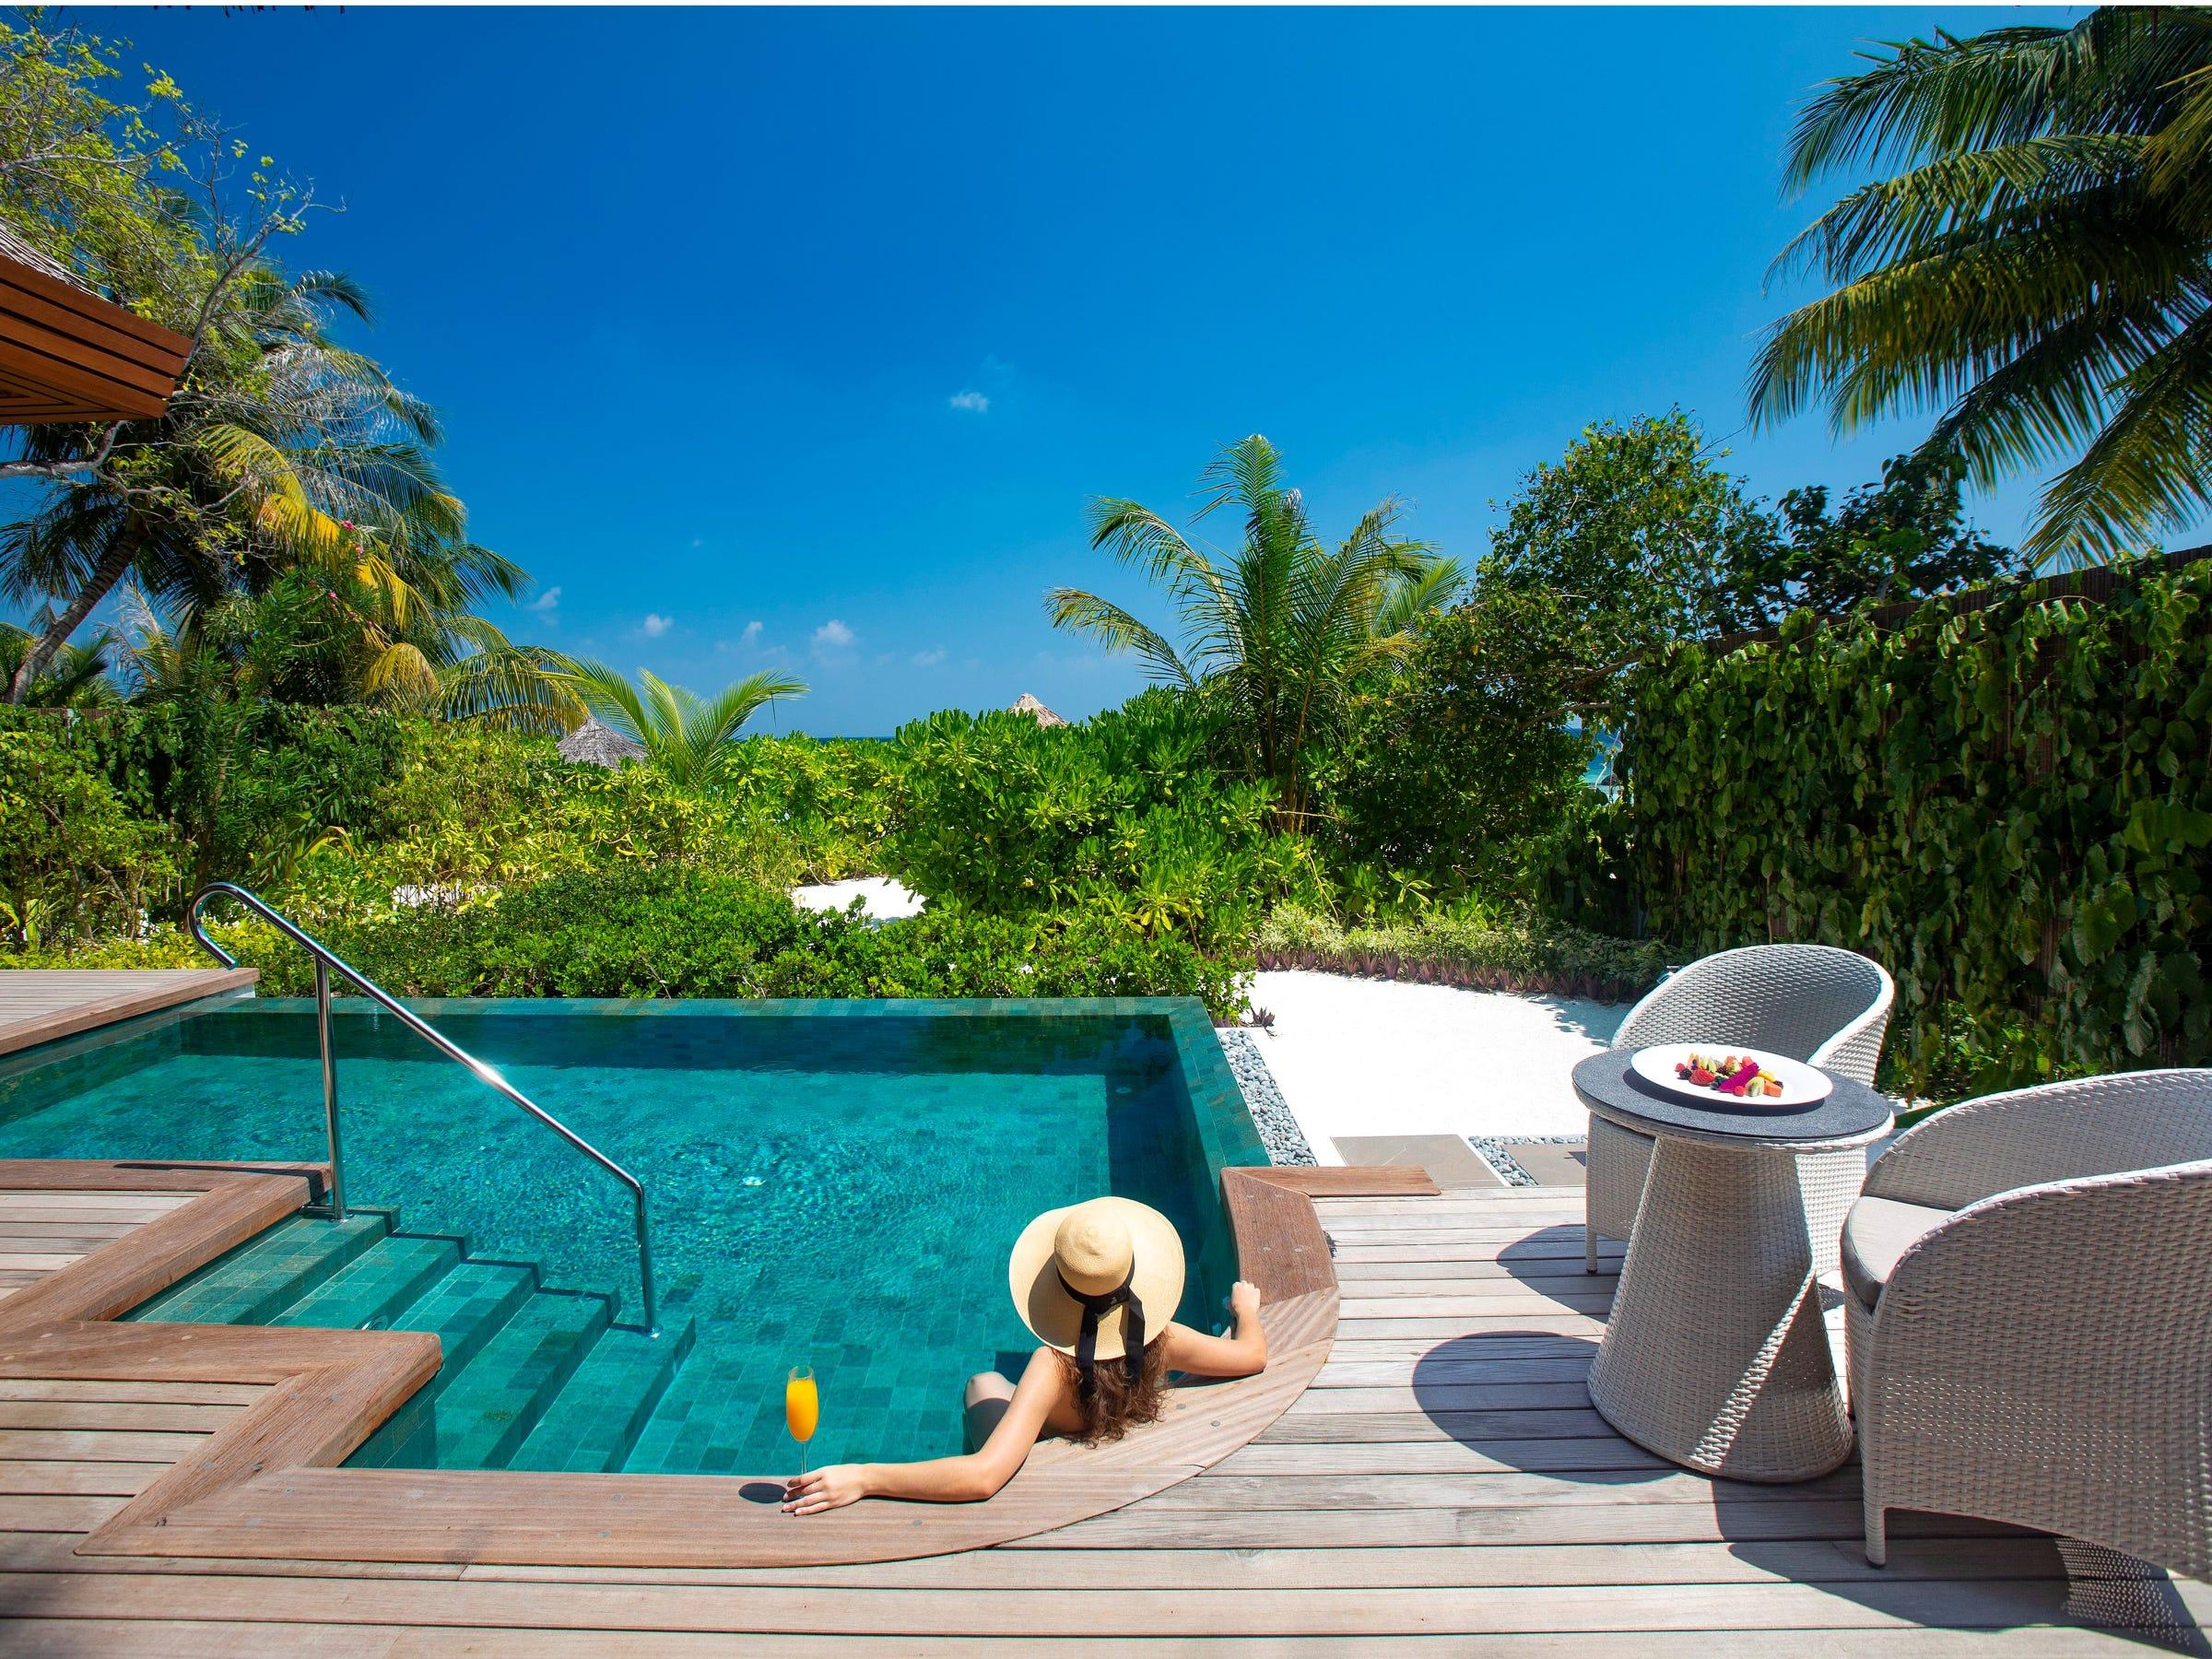 Each suite also comes with its own private infinity swimming pool and both a hot and cold Jacuzzi.